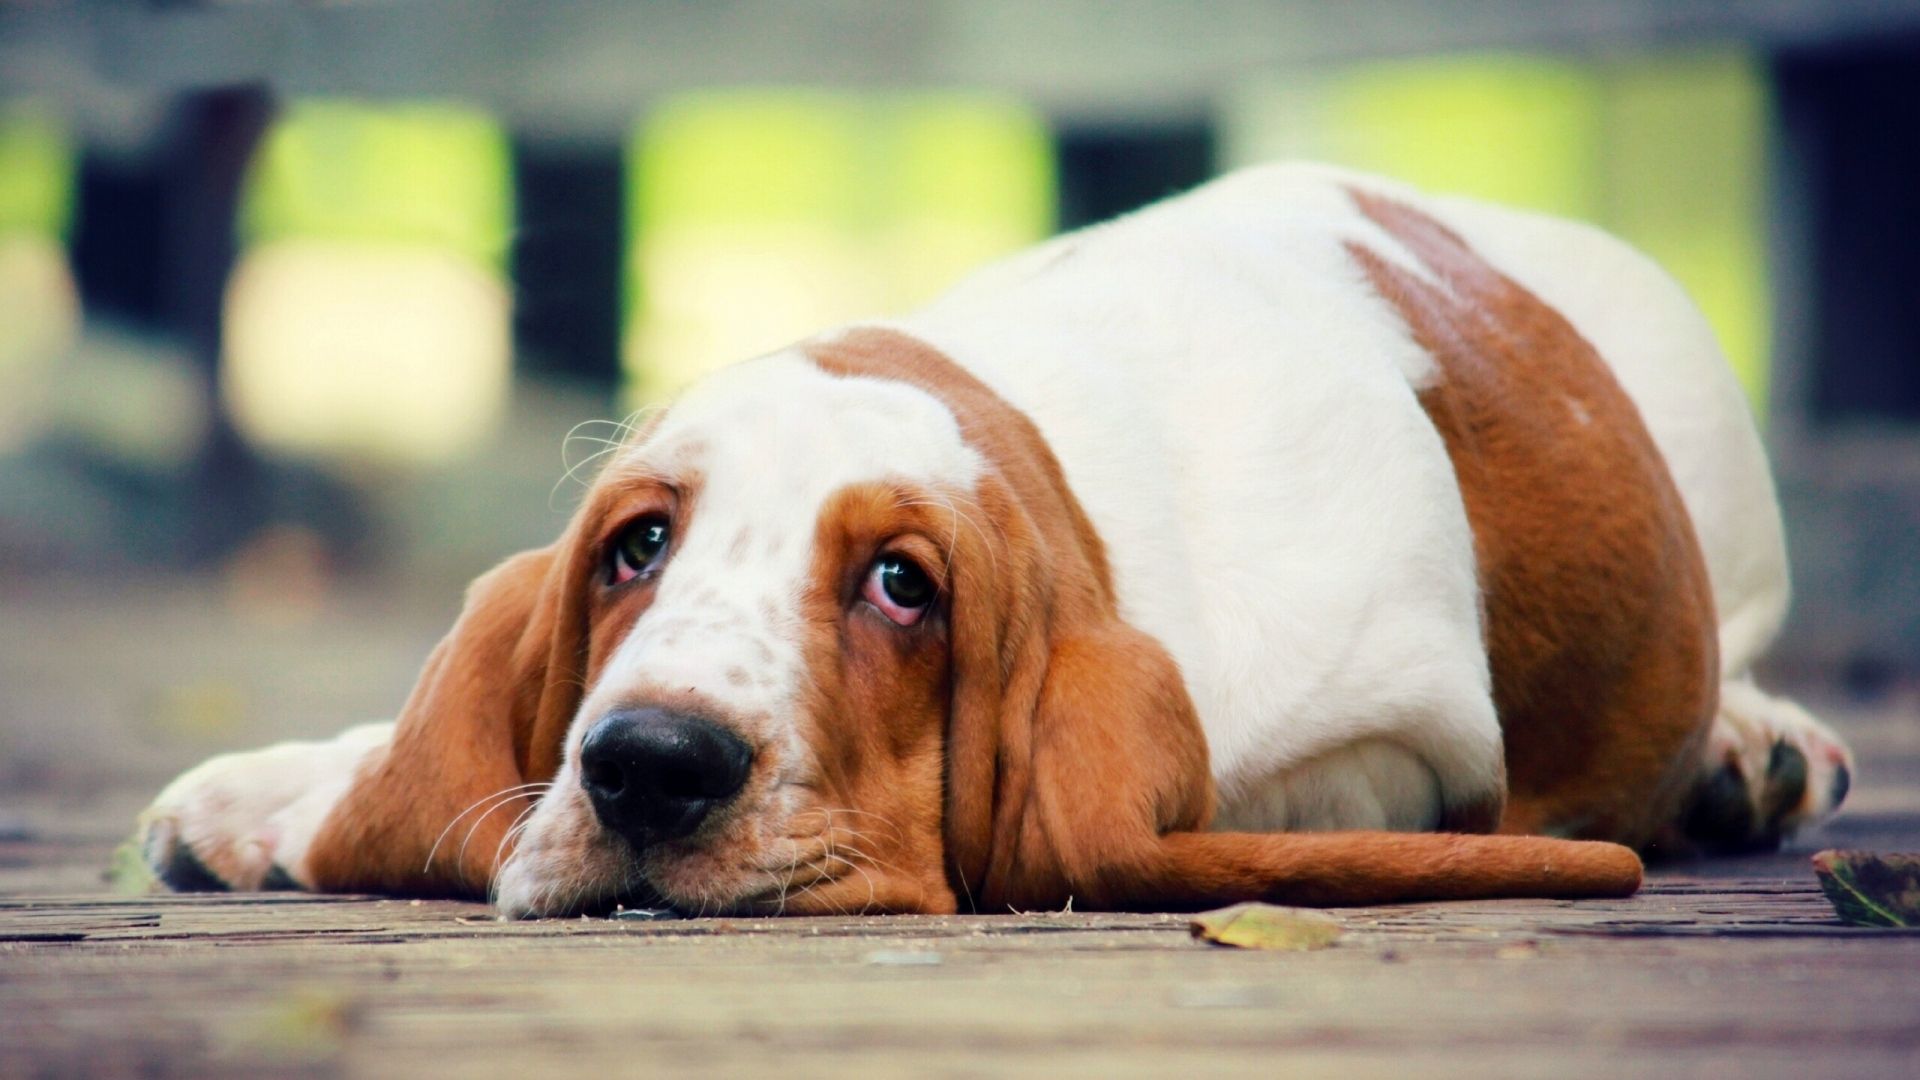 Basset Hound Wallpaper Picture For iPhone Blackberry iPad. Basset hound, Basset, Bassett hound